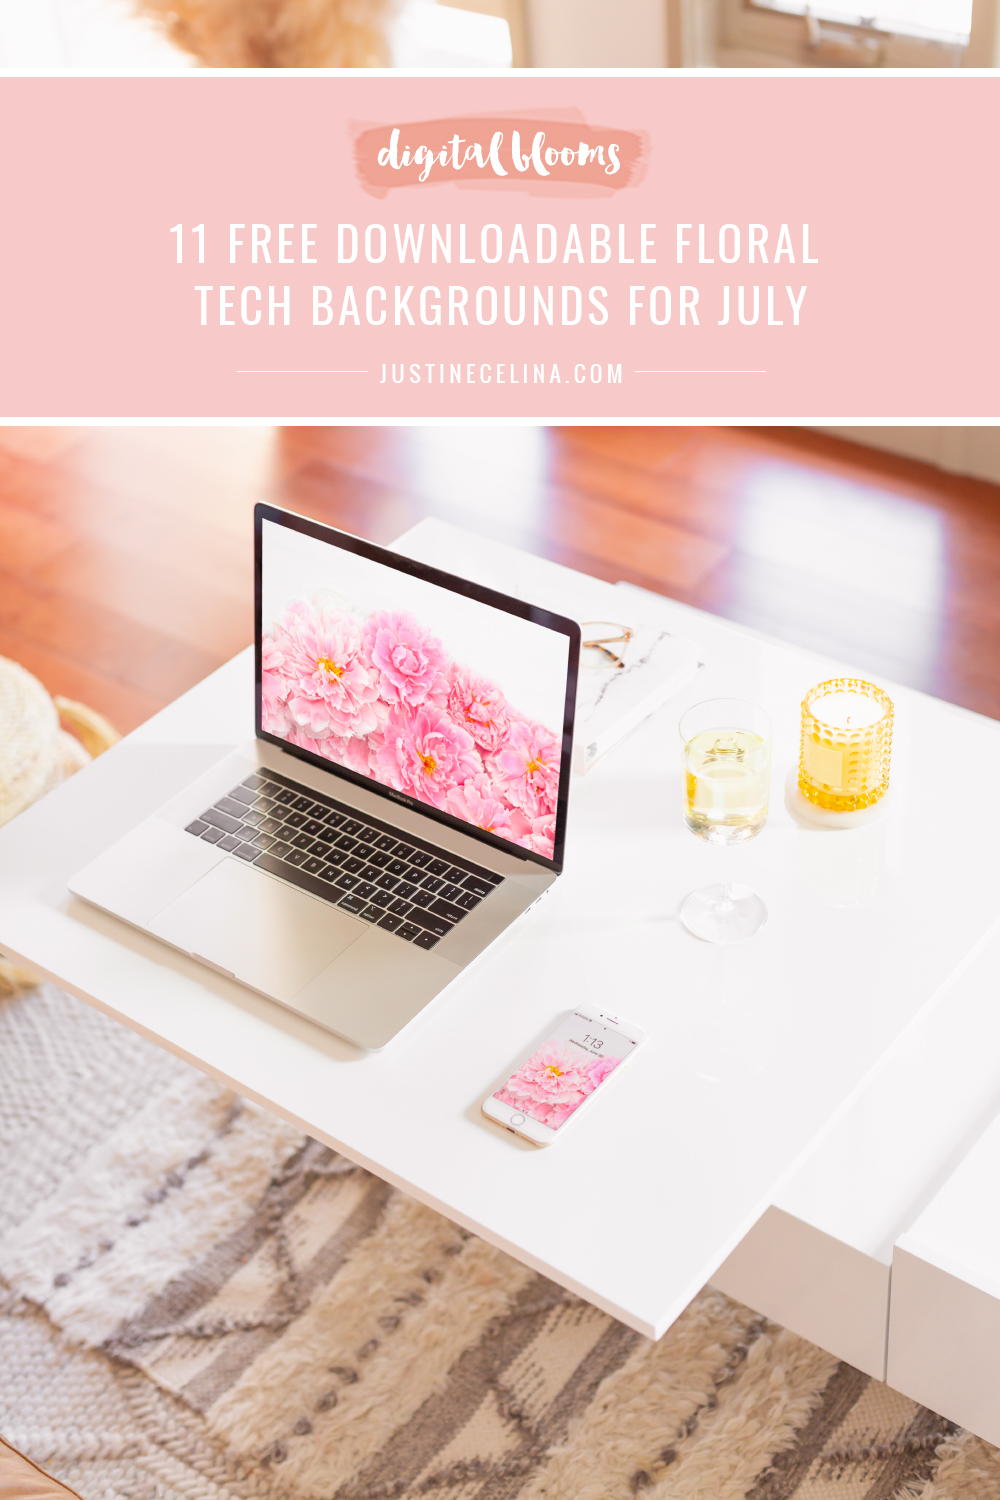 DIGITAL BLOOMS JULY 2021 | 11 Free Downloadable Floral Tech Backgrounds for Summer | Feminine WFH set up with a MacBook Pro and iPhone featuring JustineCelina’s July Peony Digital Blooms floral tech wallpaper, a glass of white wine and a yellow candle in a bright and sunny bohemian Living Room | Female Entrepreneur Digital Wallpapers | The Best of Justine Celina’s Summer Digital Blooms | Peony Desktop Wallpaper | Free Pink Peony Wallpaper | Calgary Creative Lifestyle Blogger // JustineCelina.com